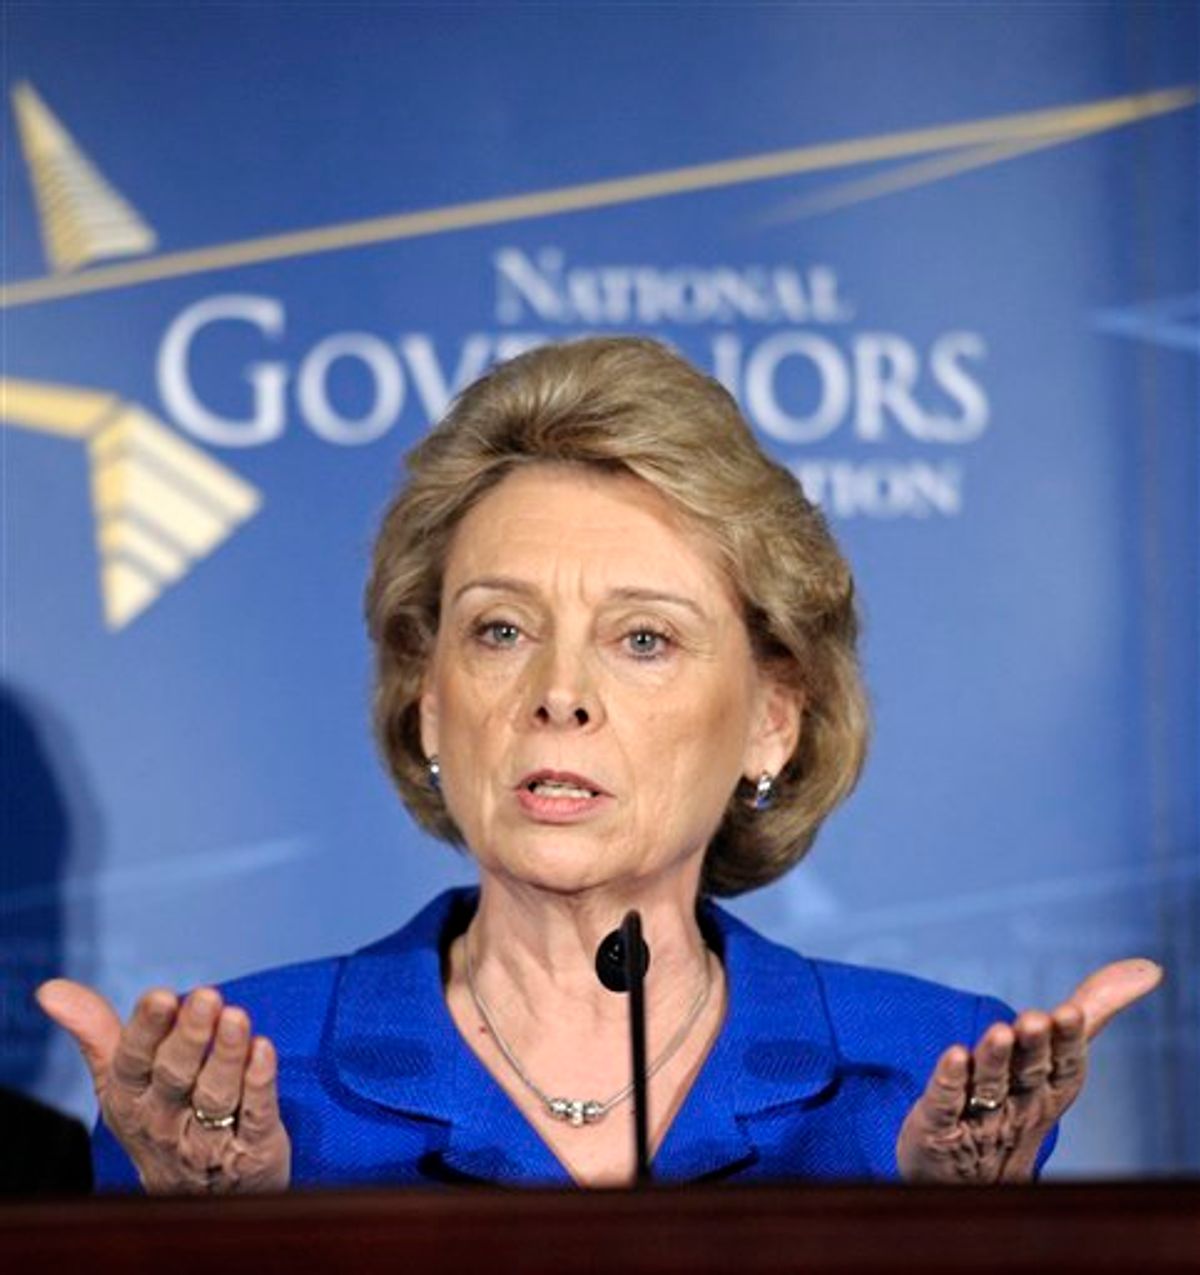 National Governors Association (NGA) Chair, Washington Gov. Christine Gregoire gestures during a news conference at the association's winter meeting in Washington, Saturday, Feb. 26, 2011. (AP Photo/Cliff Owen) (AP)